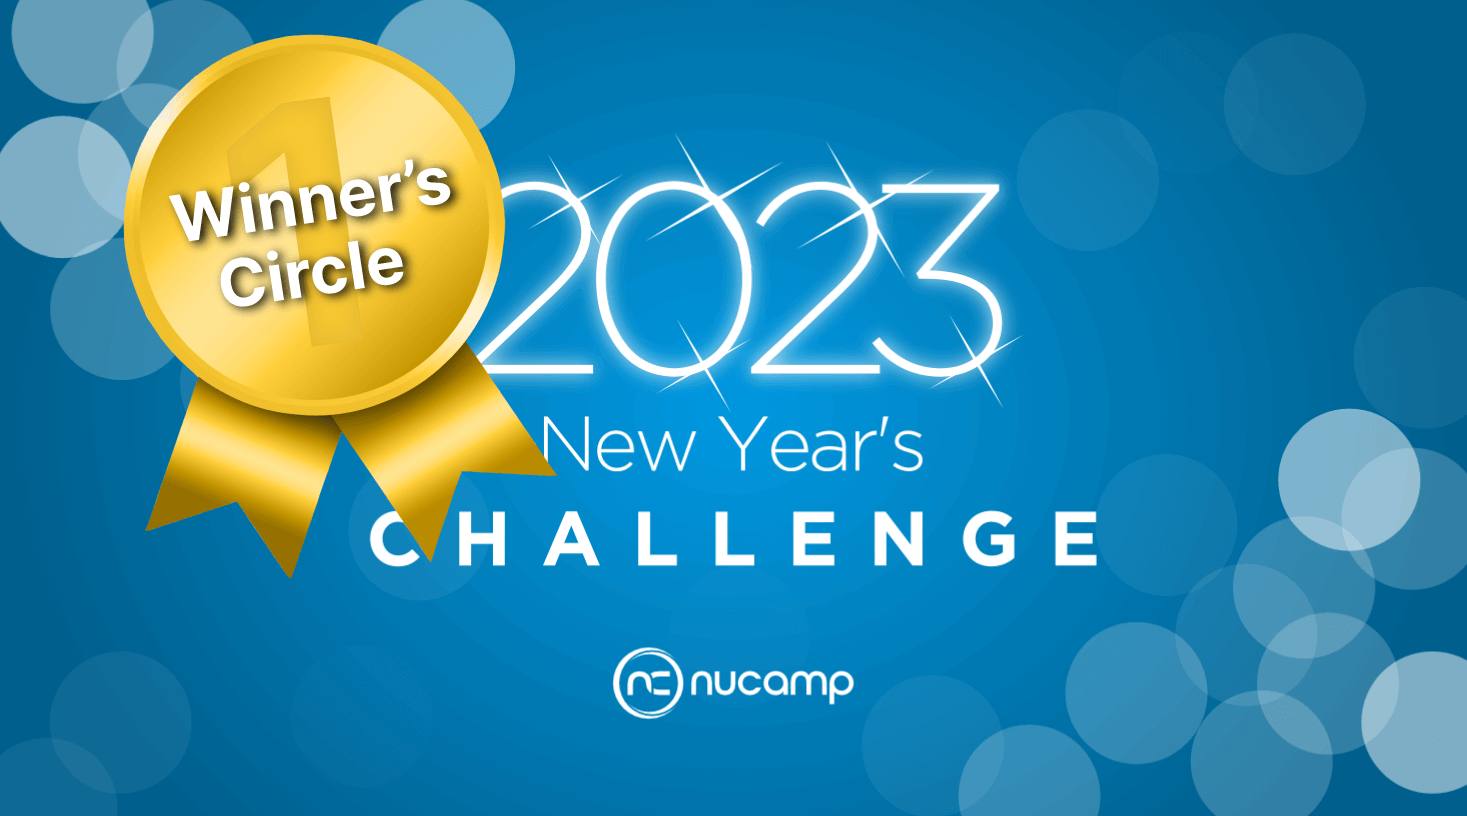 Nucamp graduates win 15% off tuition by winning the New Year's Challenge